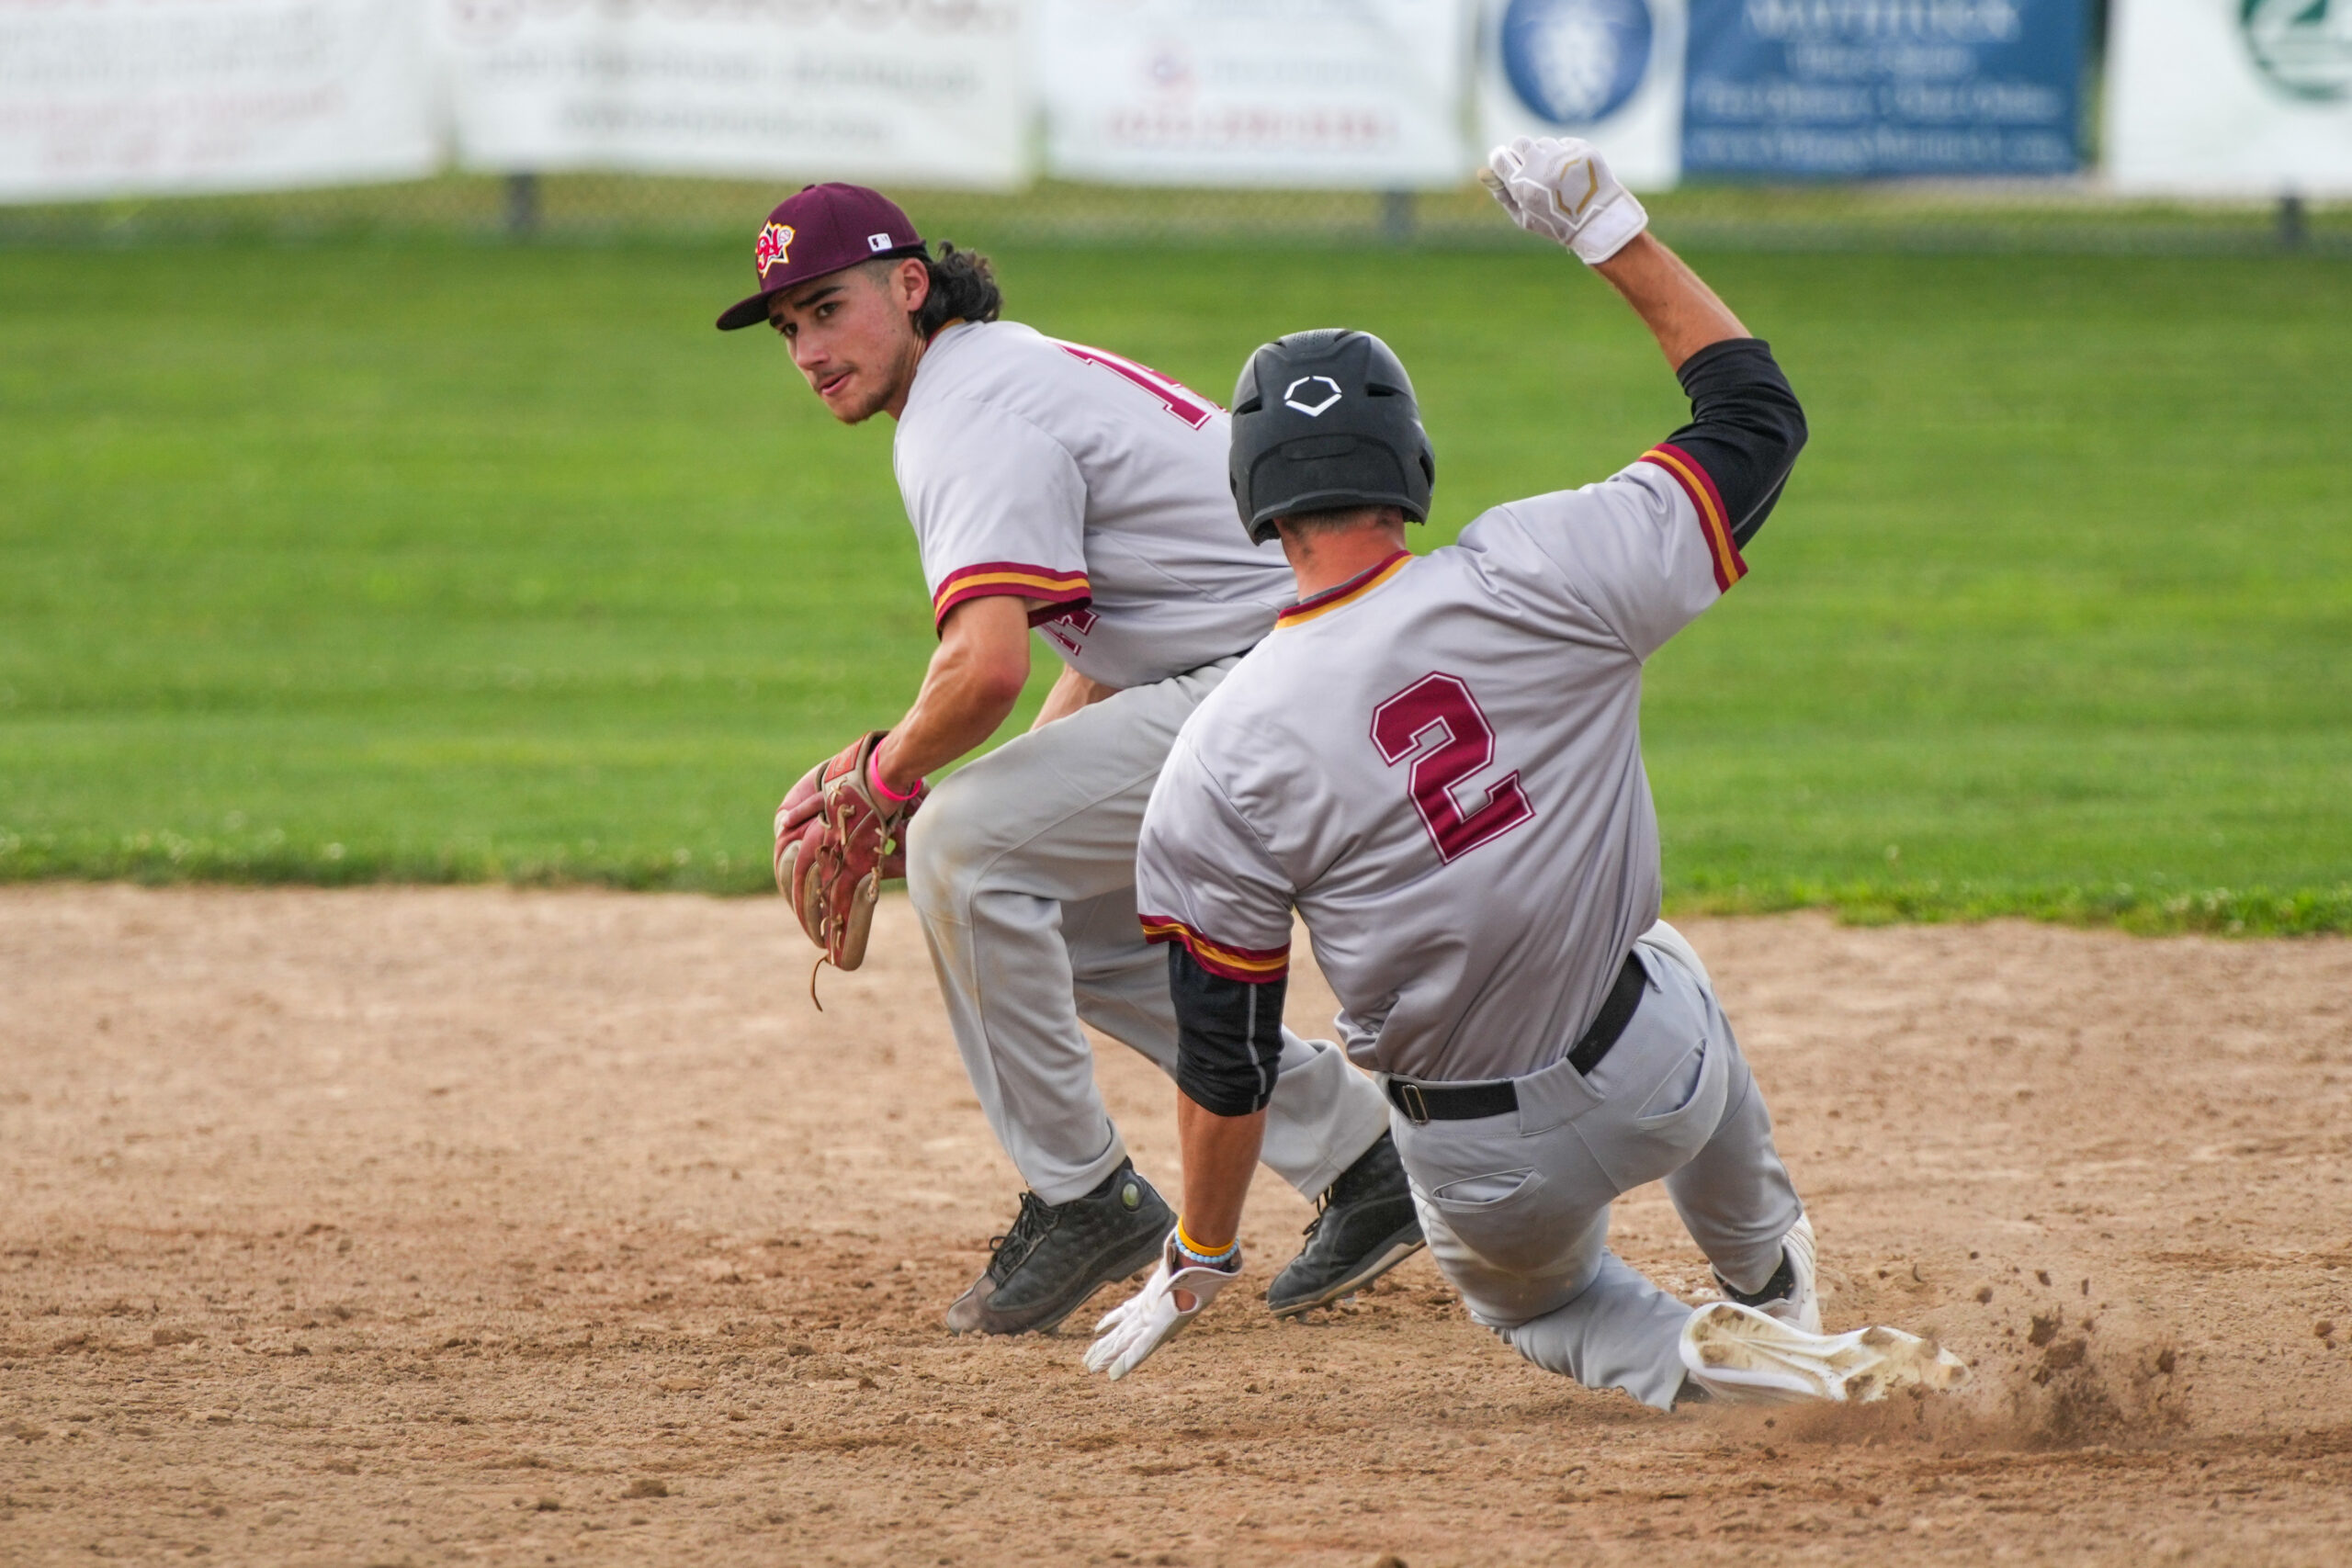 Red Team All-Star Esai Santos (Southampton/Holy Names) looks to avoid Gold Team All-Star Conor Kiely (Shelter Island/Stonehill) sliding into second base. RON ESPOSITO